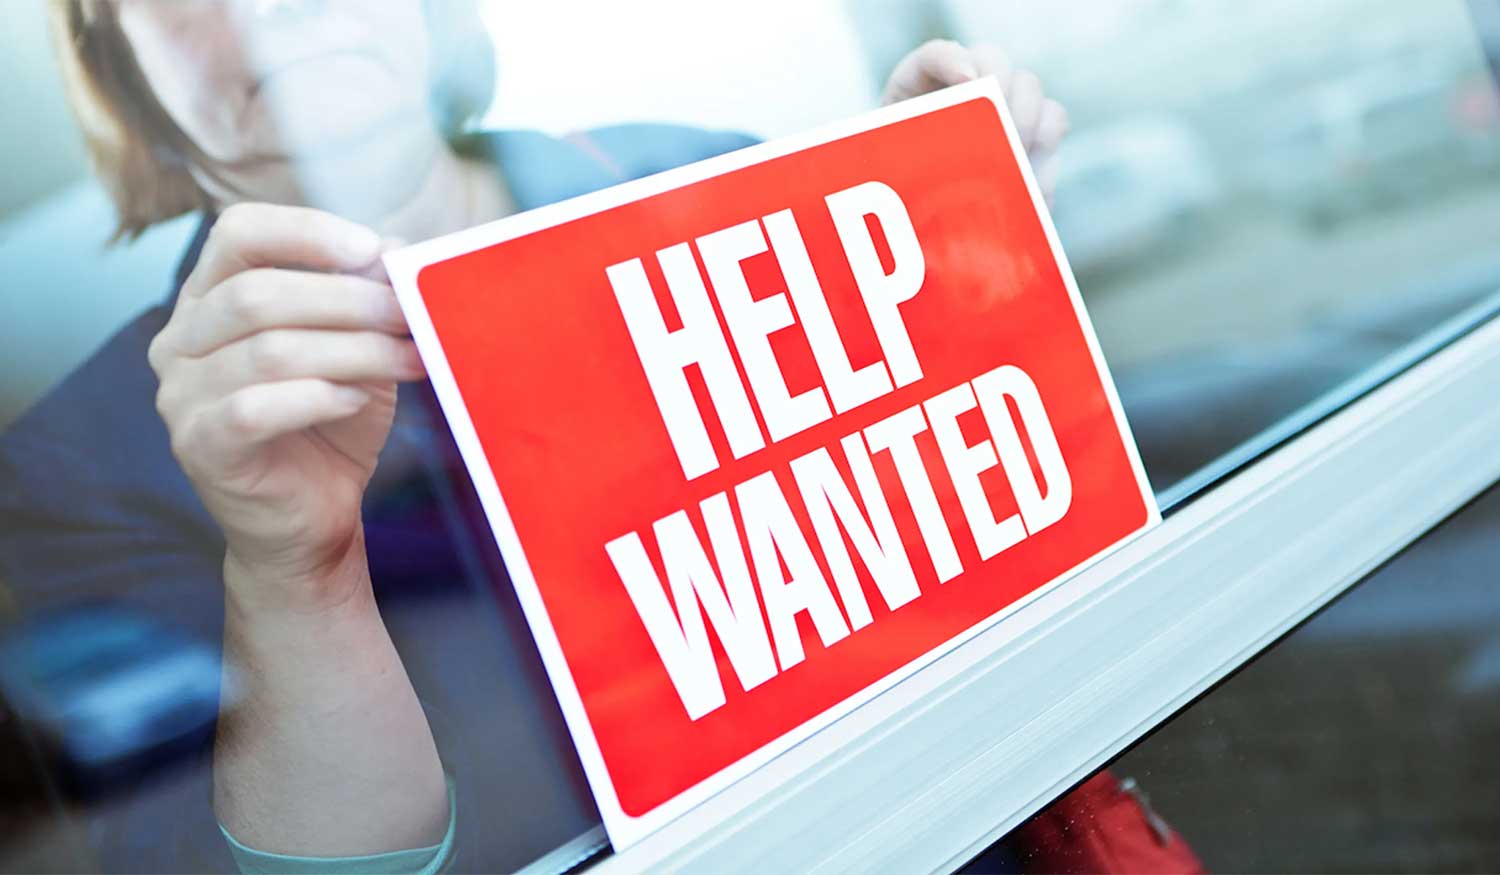 Help Wanted signs are everywhere nowadays, especially in a down economy. Have we acknowledged our need for help from an all-knowing, all-powerful God?